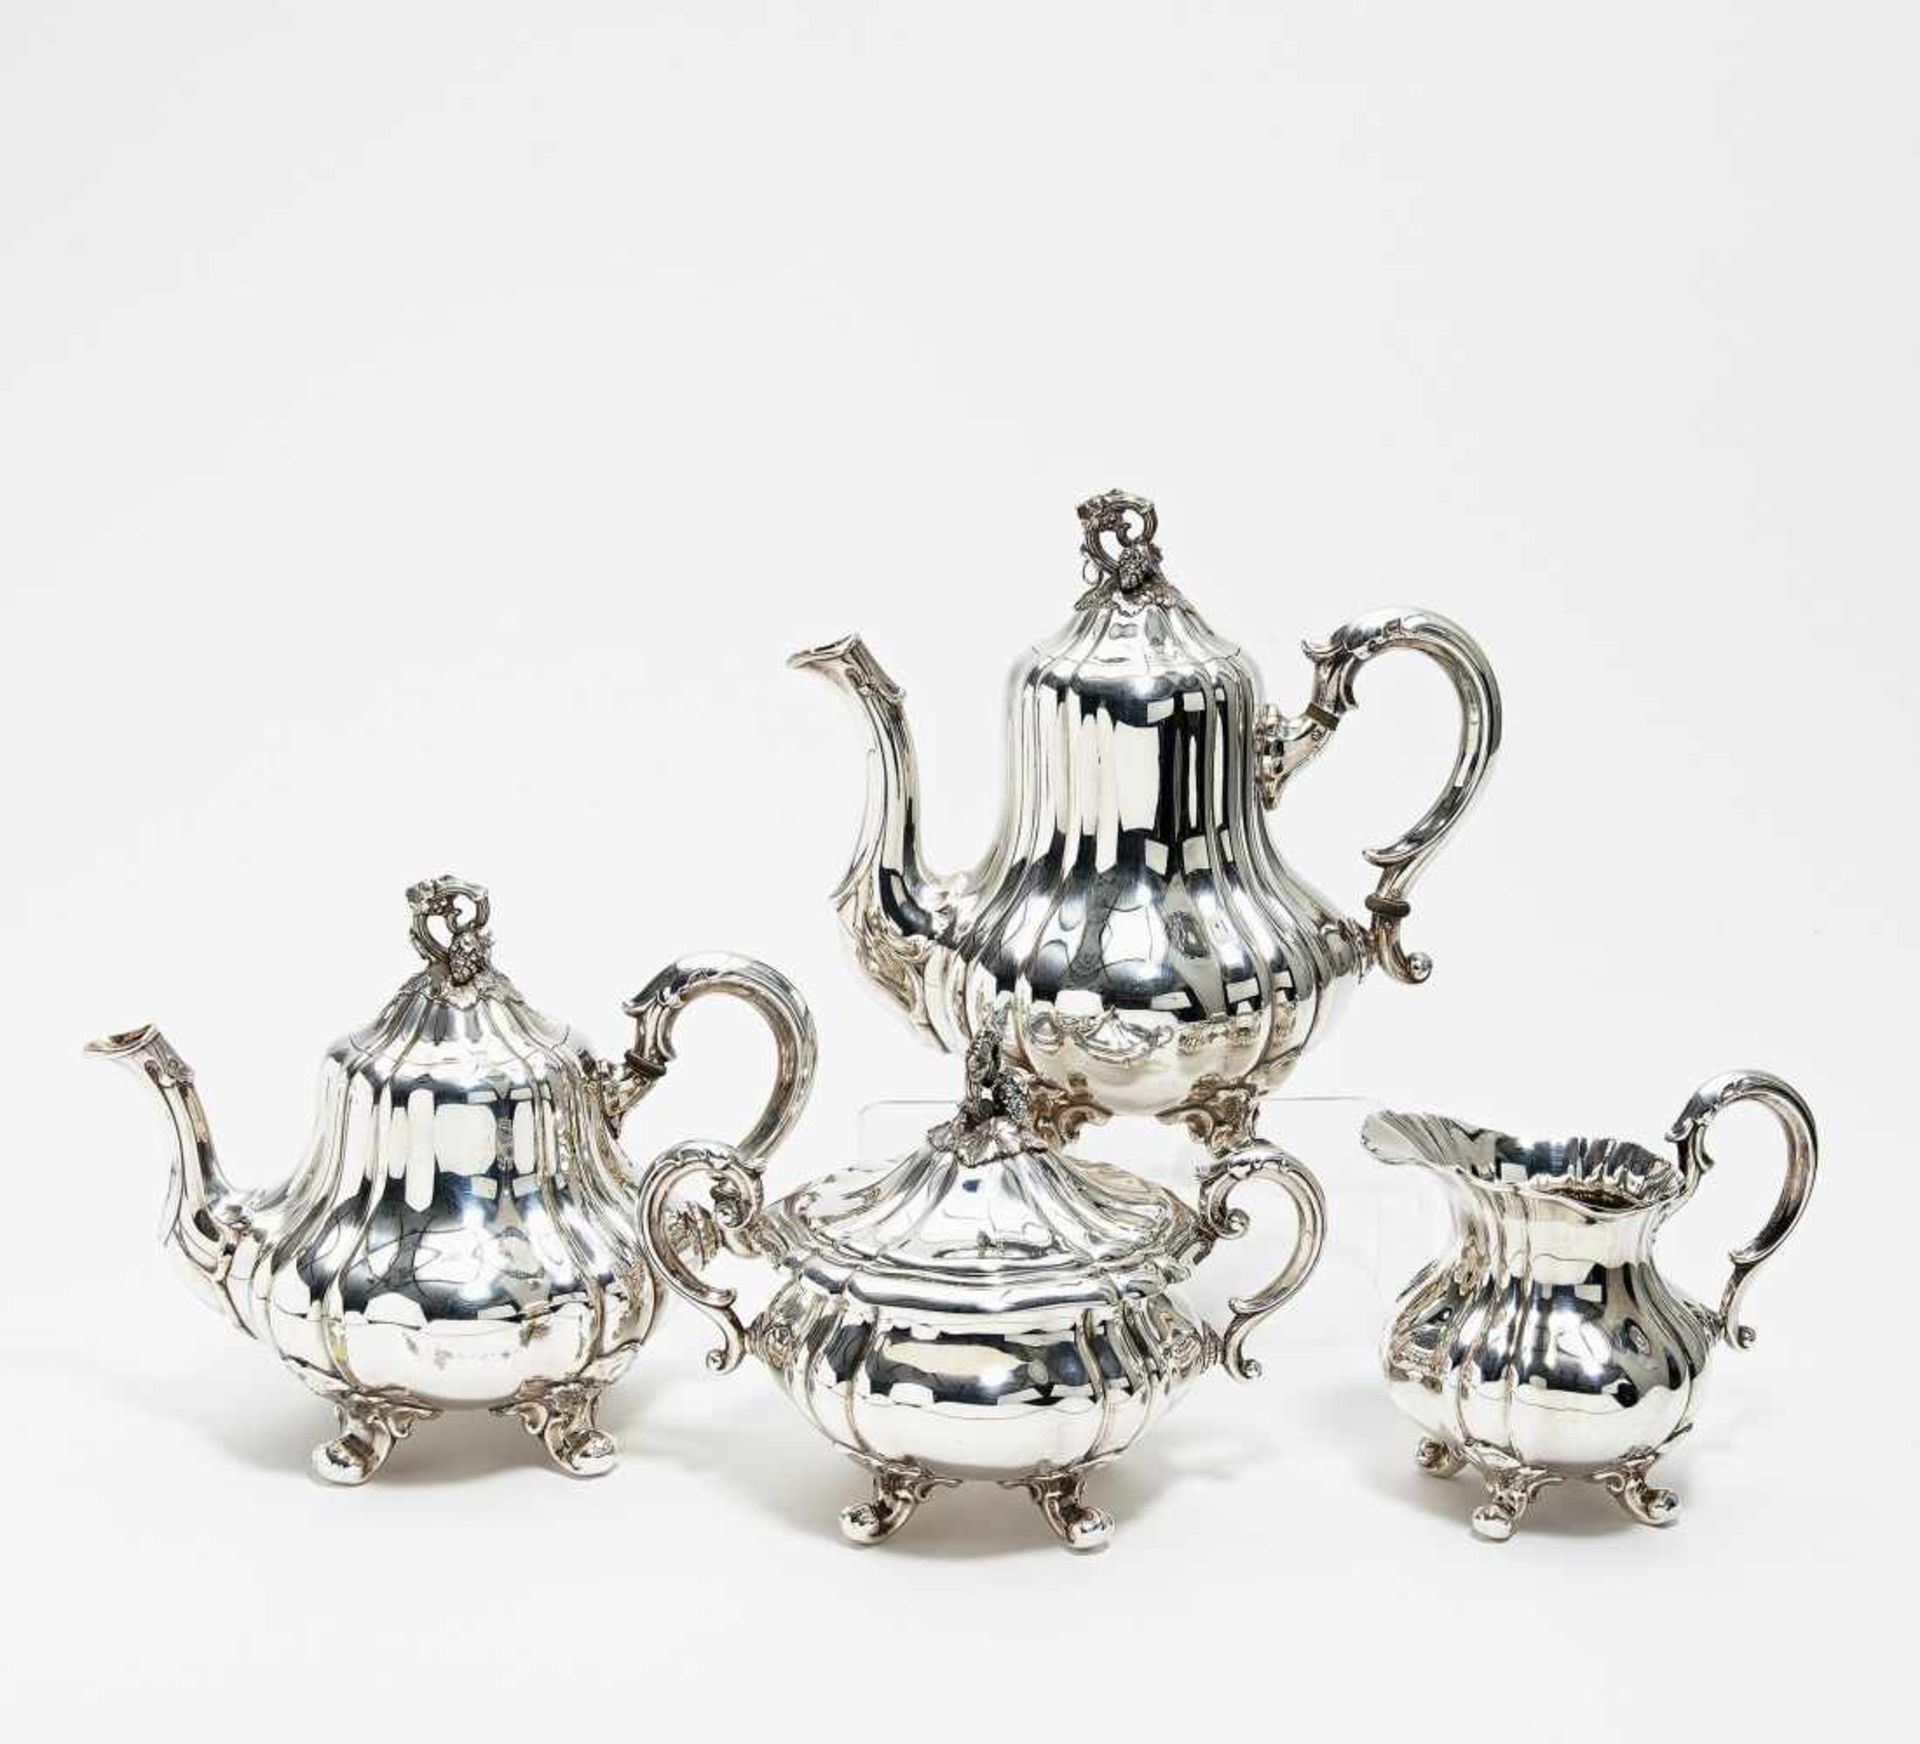 FOUR PIECE SILVER COFFEE- AND TEASERVICE WITH GRAPE DECOR. - Image 2 of 2